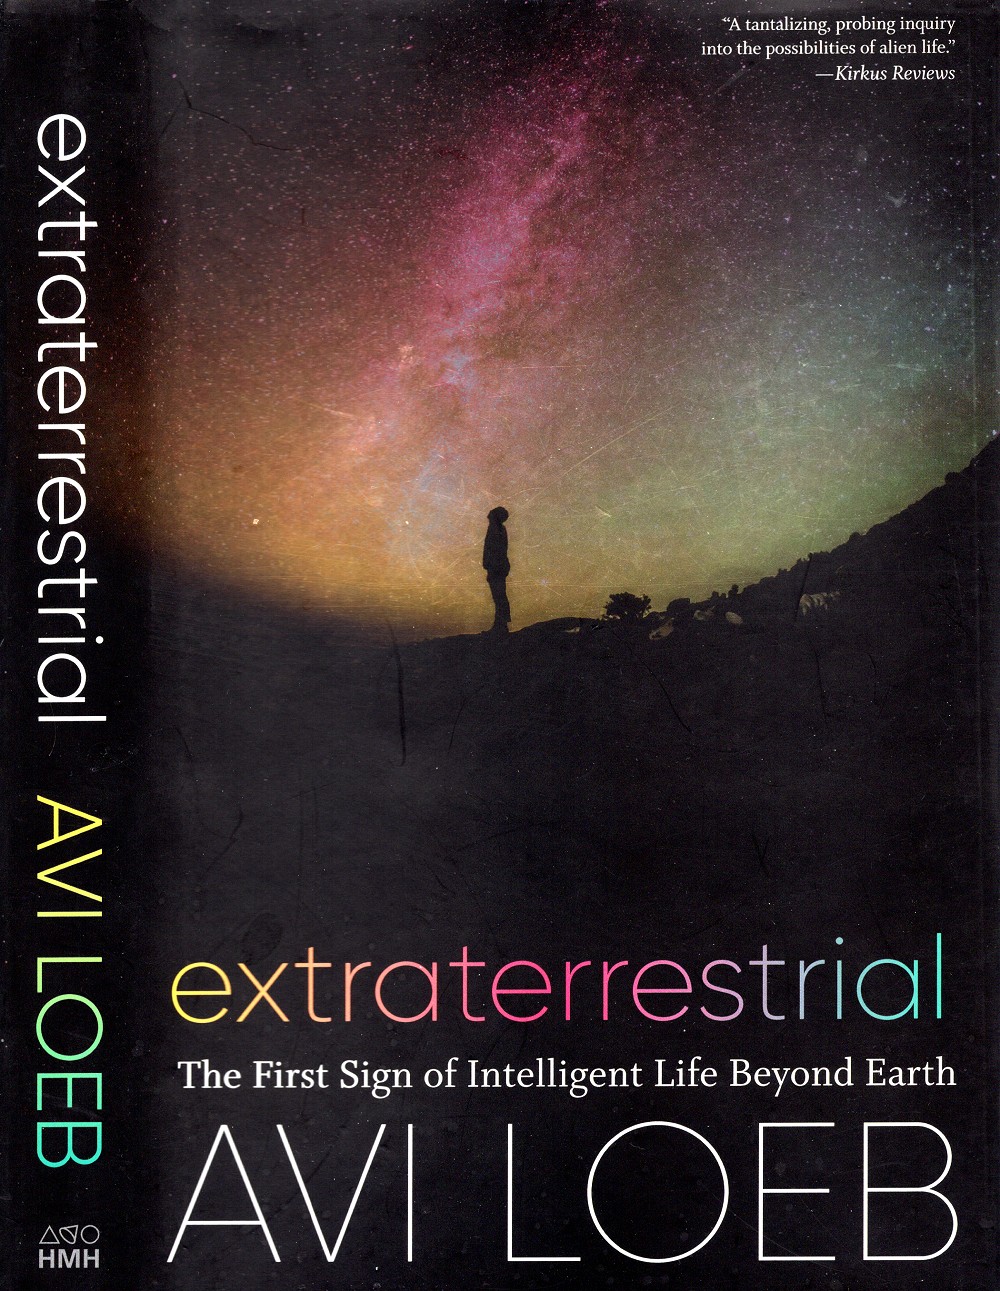 [Cover-Extraterrestrial]